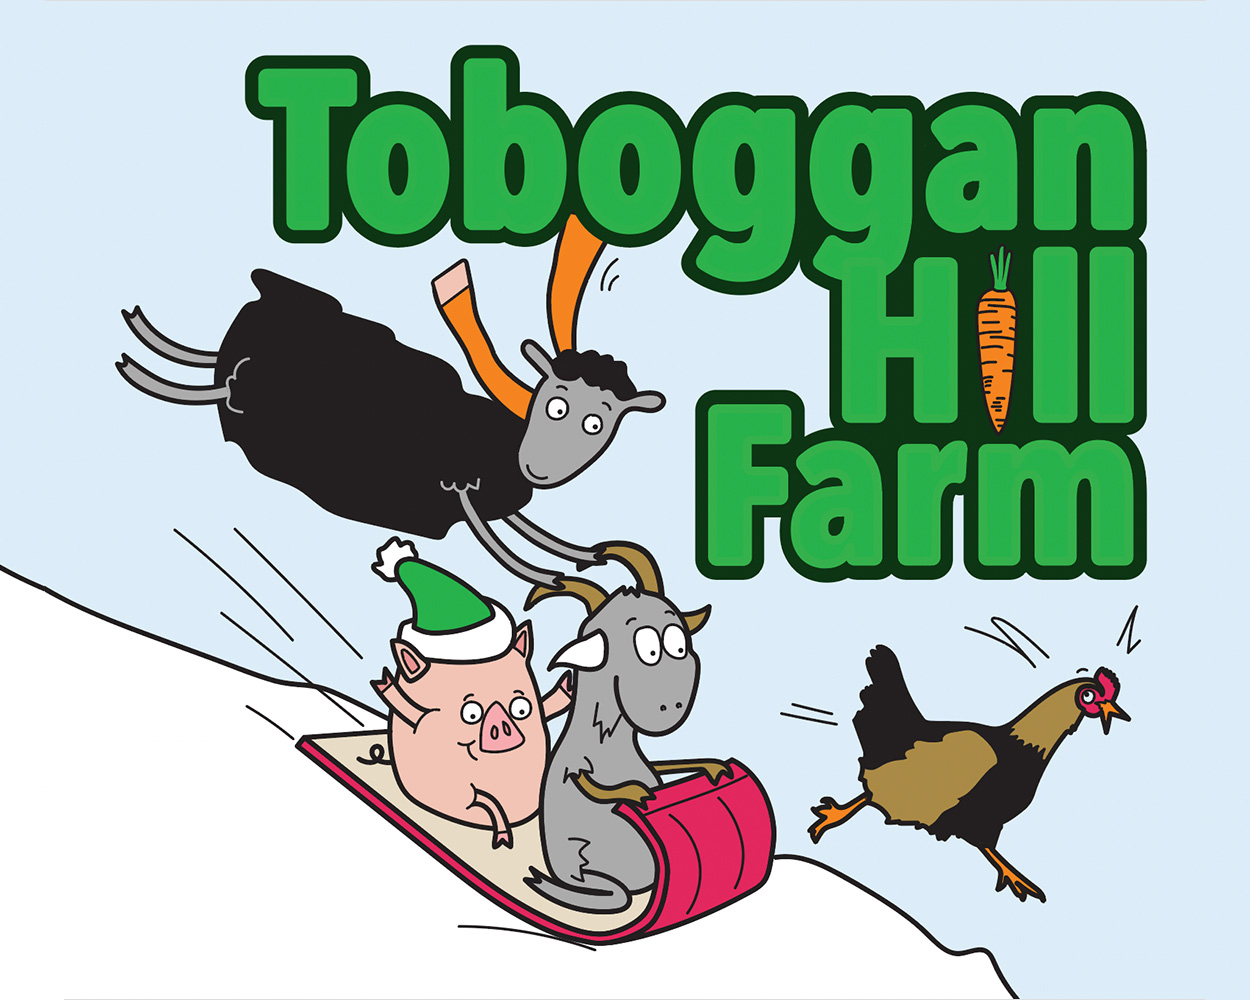 Tobaggan Hill Farm with sheep, pig, goat, and chicken sledding down a hill